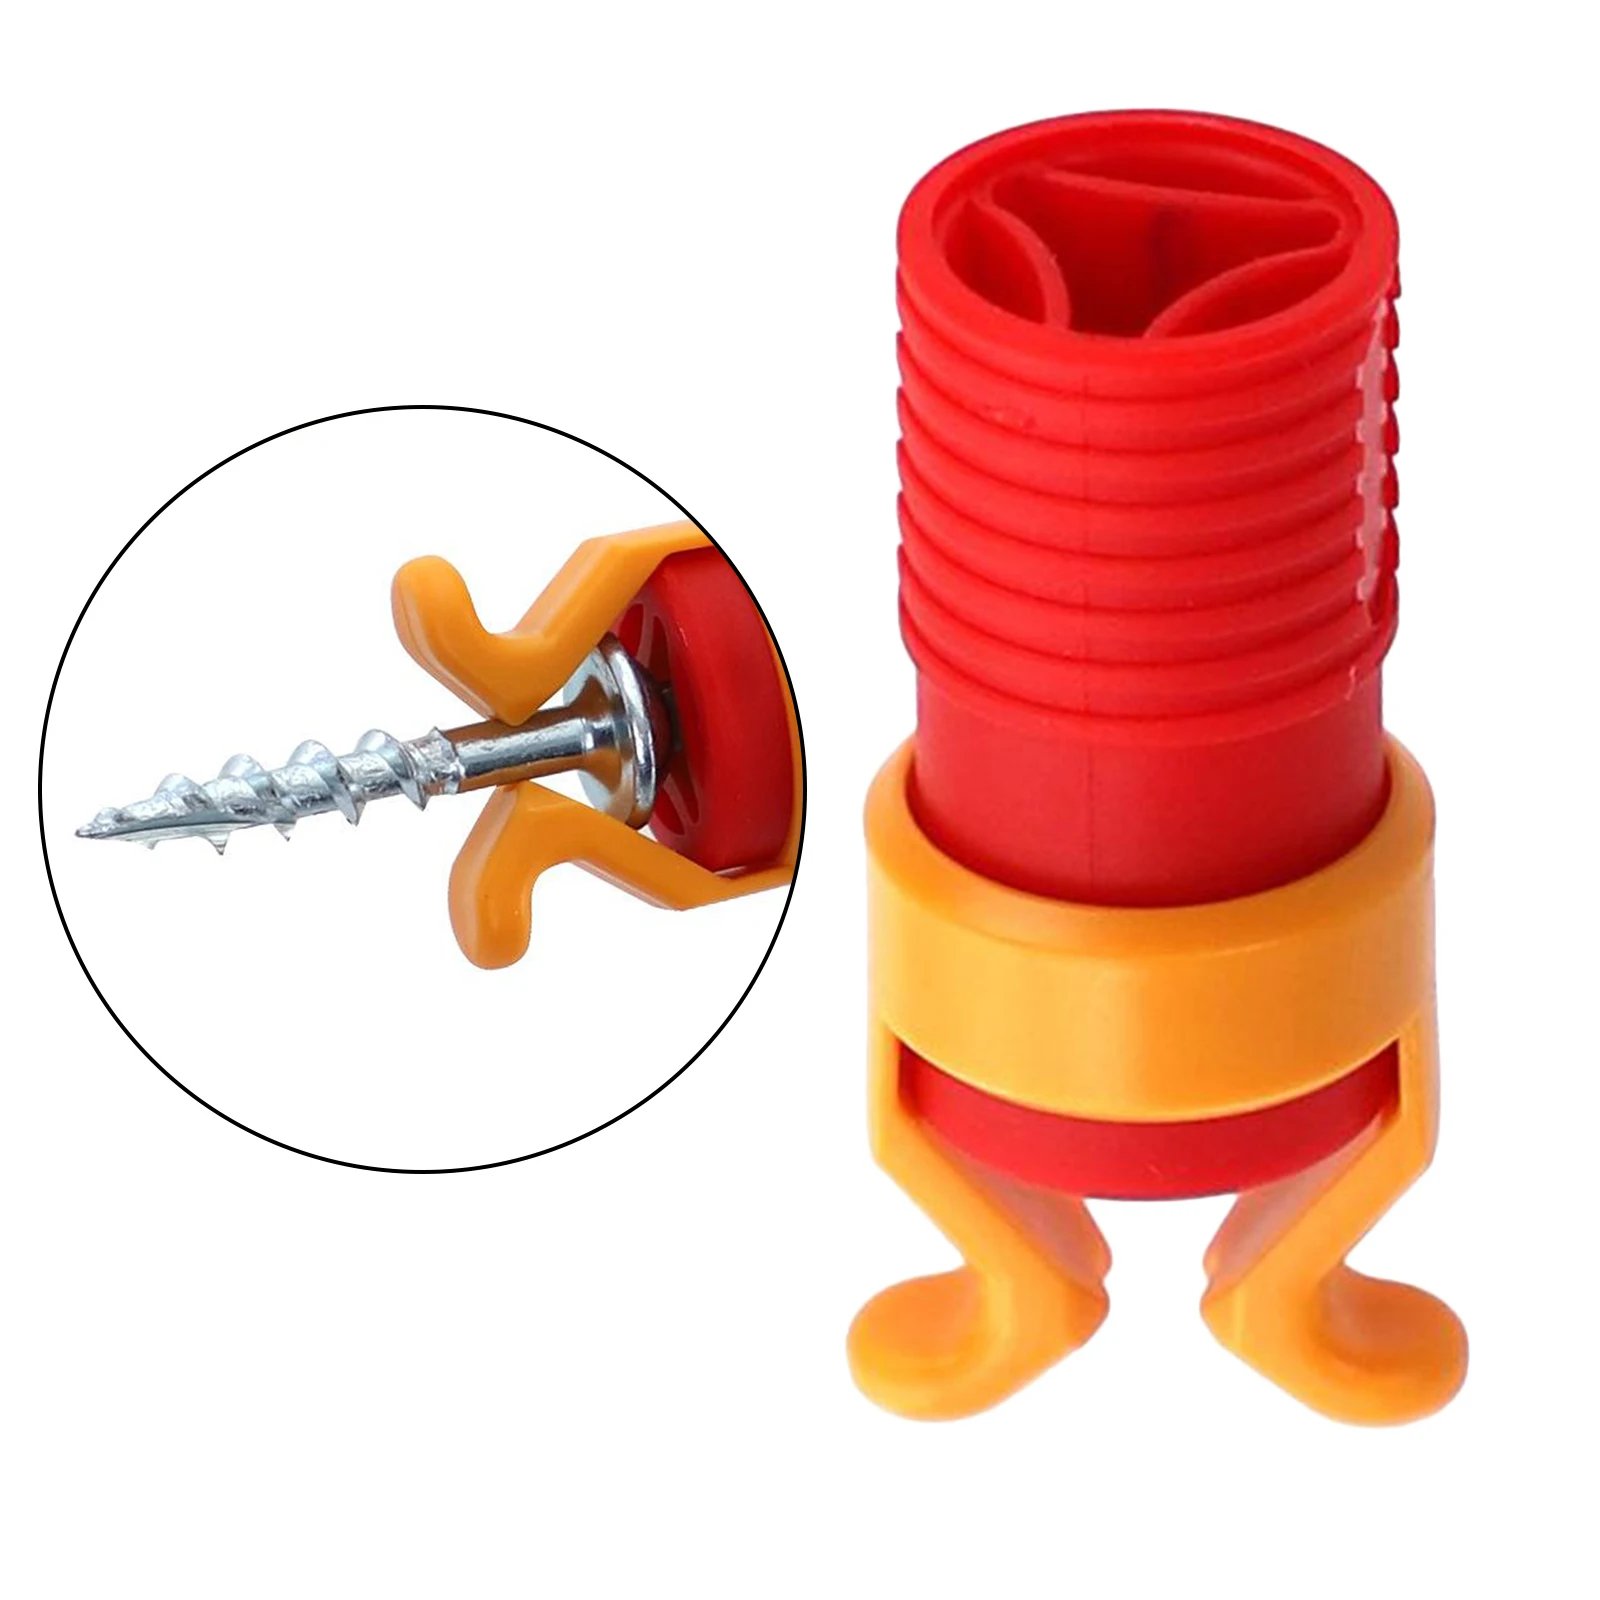 ABS Screw Holder Clamp Fixing Set Screw Gripper Holding Tool for Woodworking